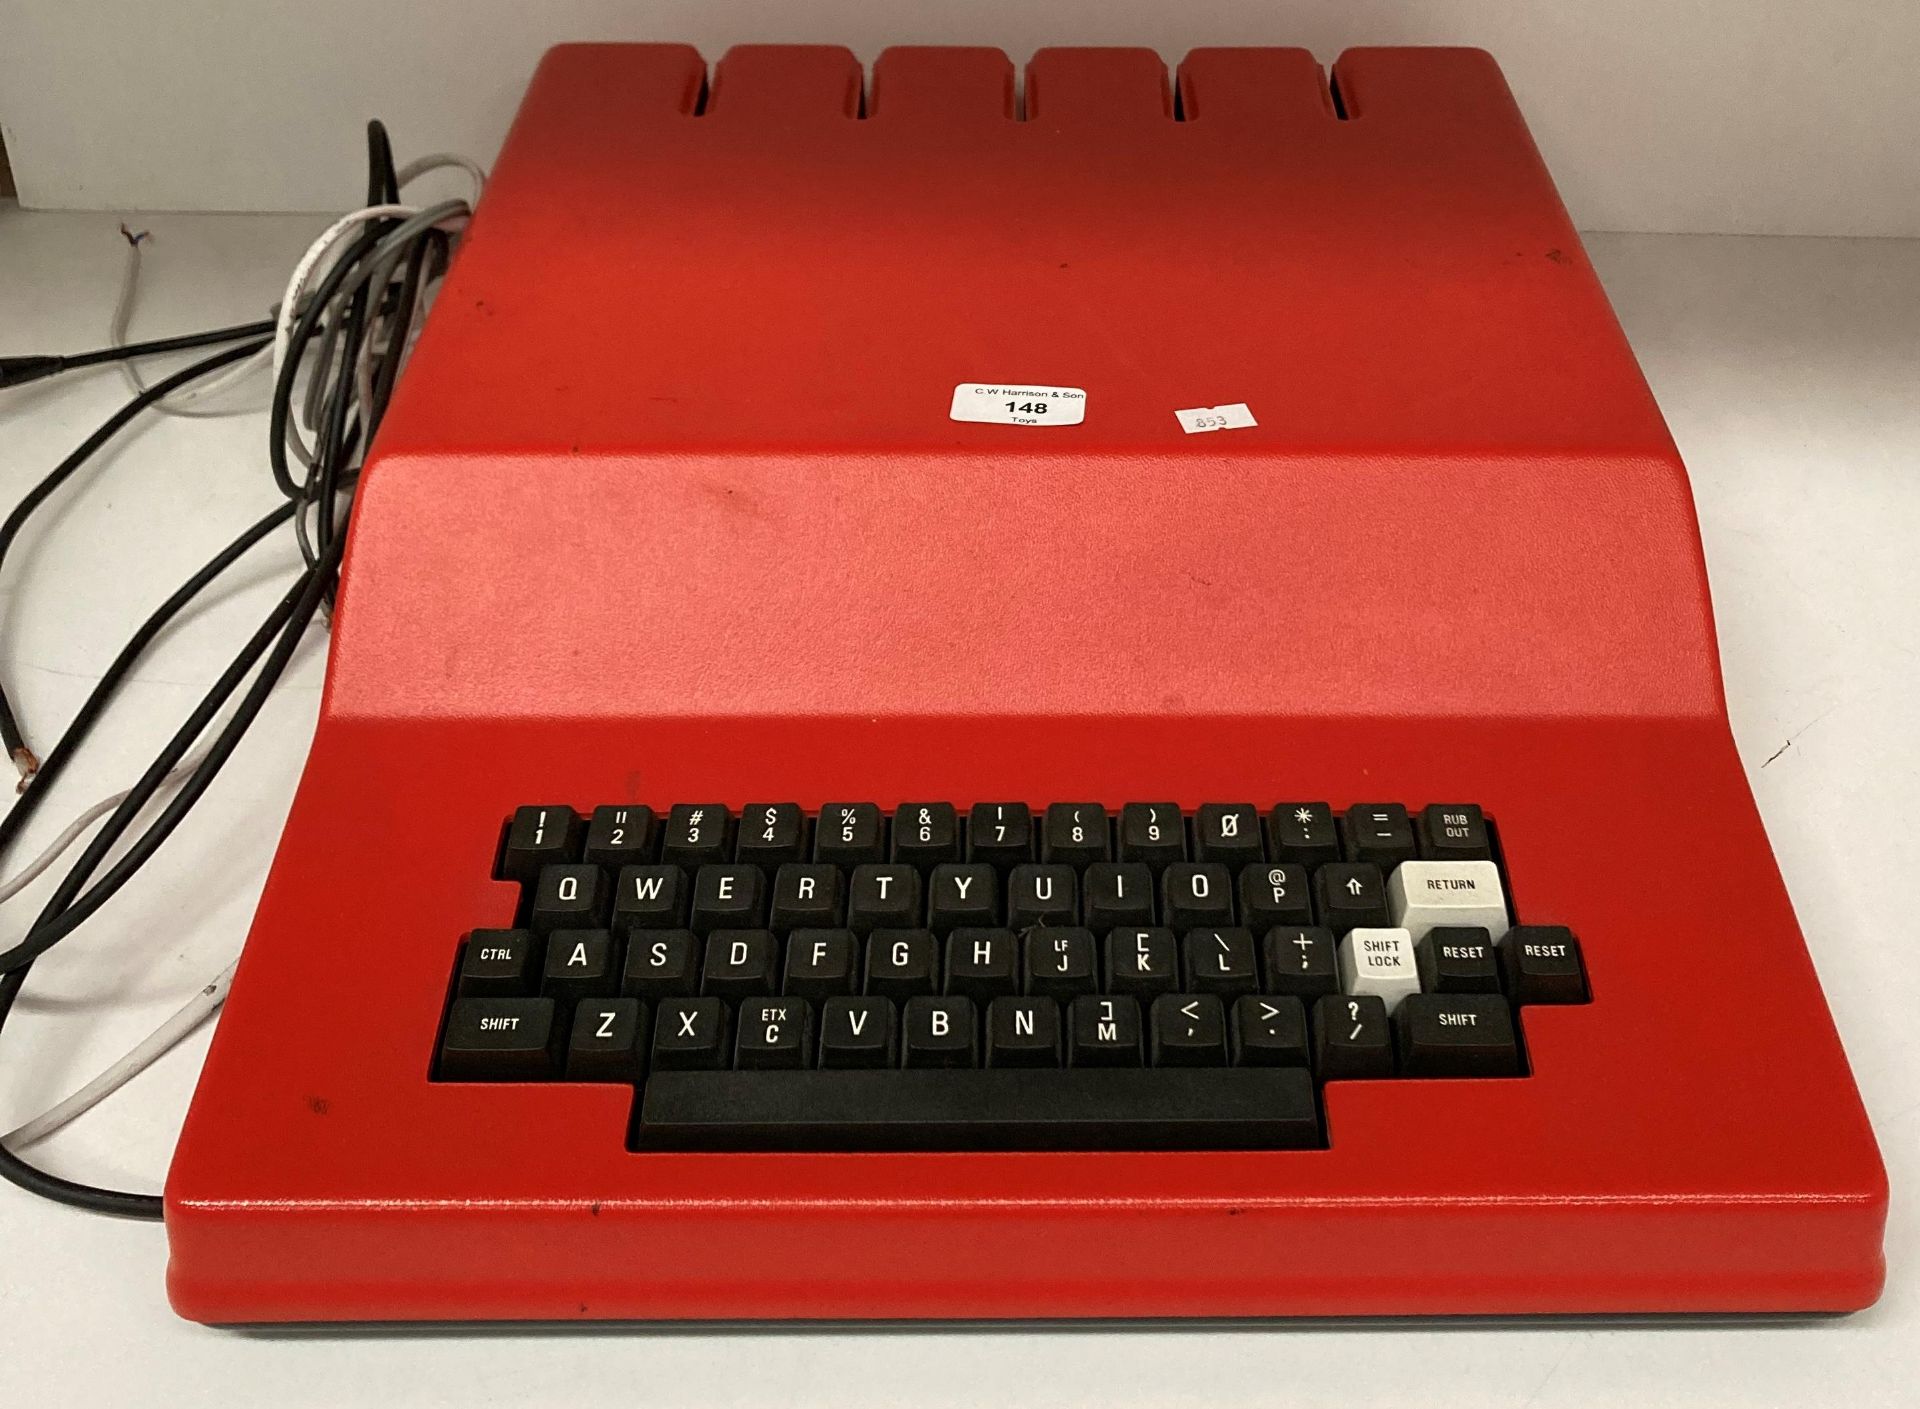 Cumpukit UK101 a single board computer in a red casing and three assorted Compukit UK101 software